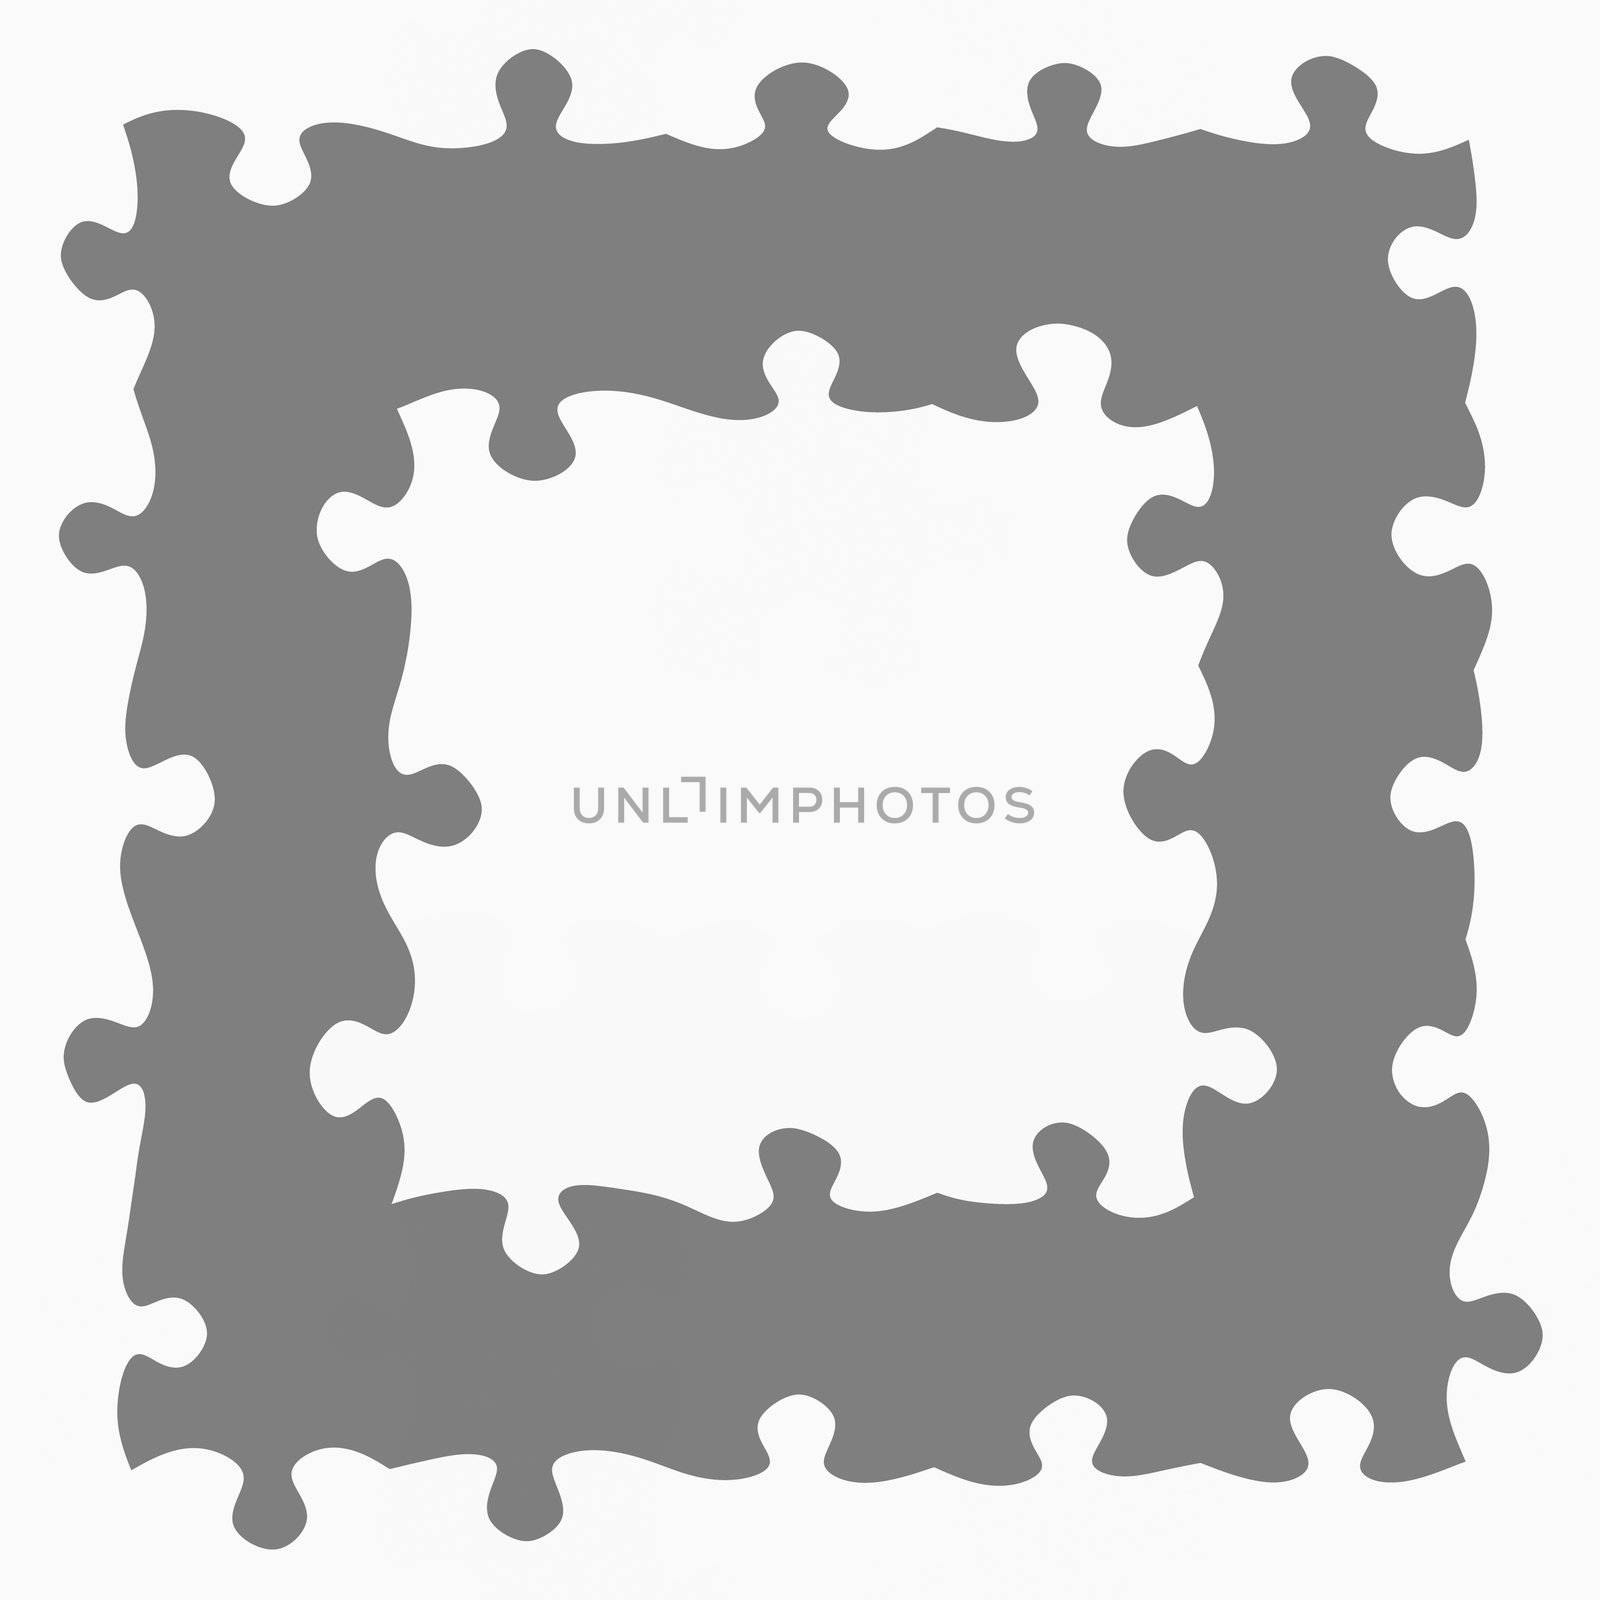 monochrome texture of puzzle pieces in a square frame 